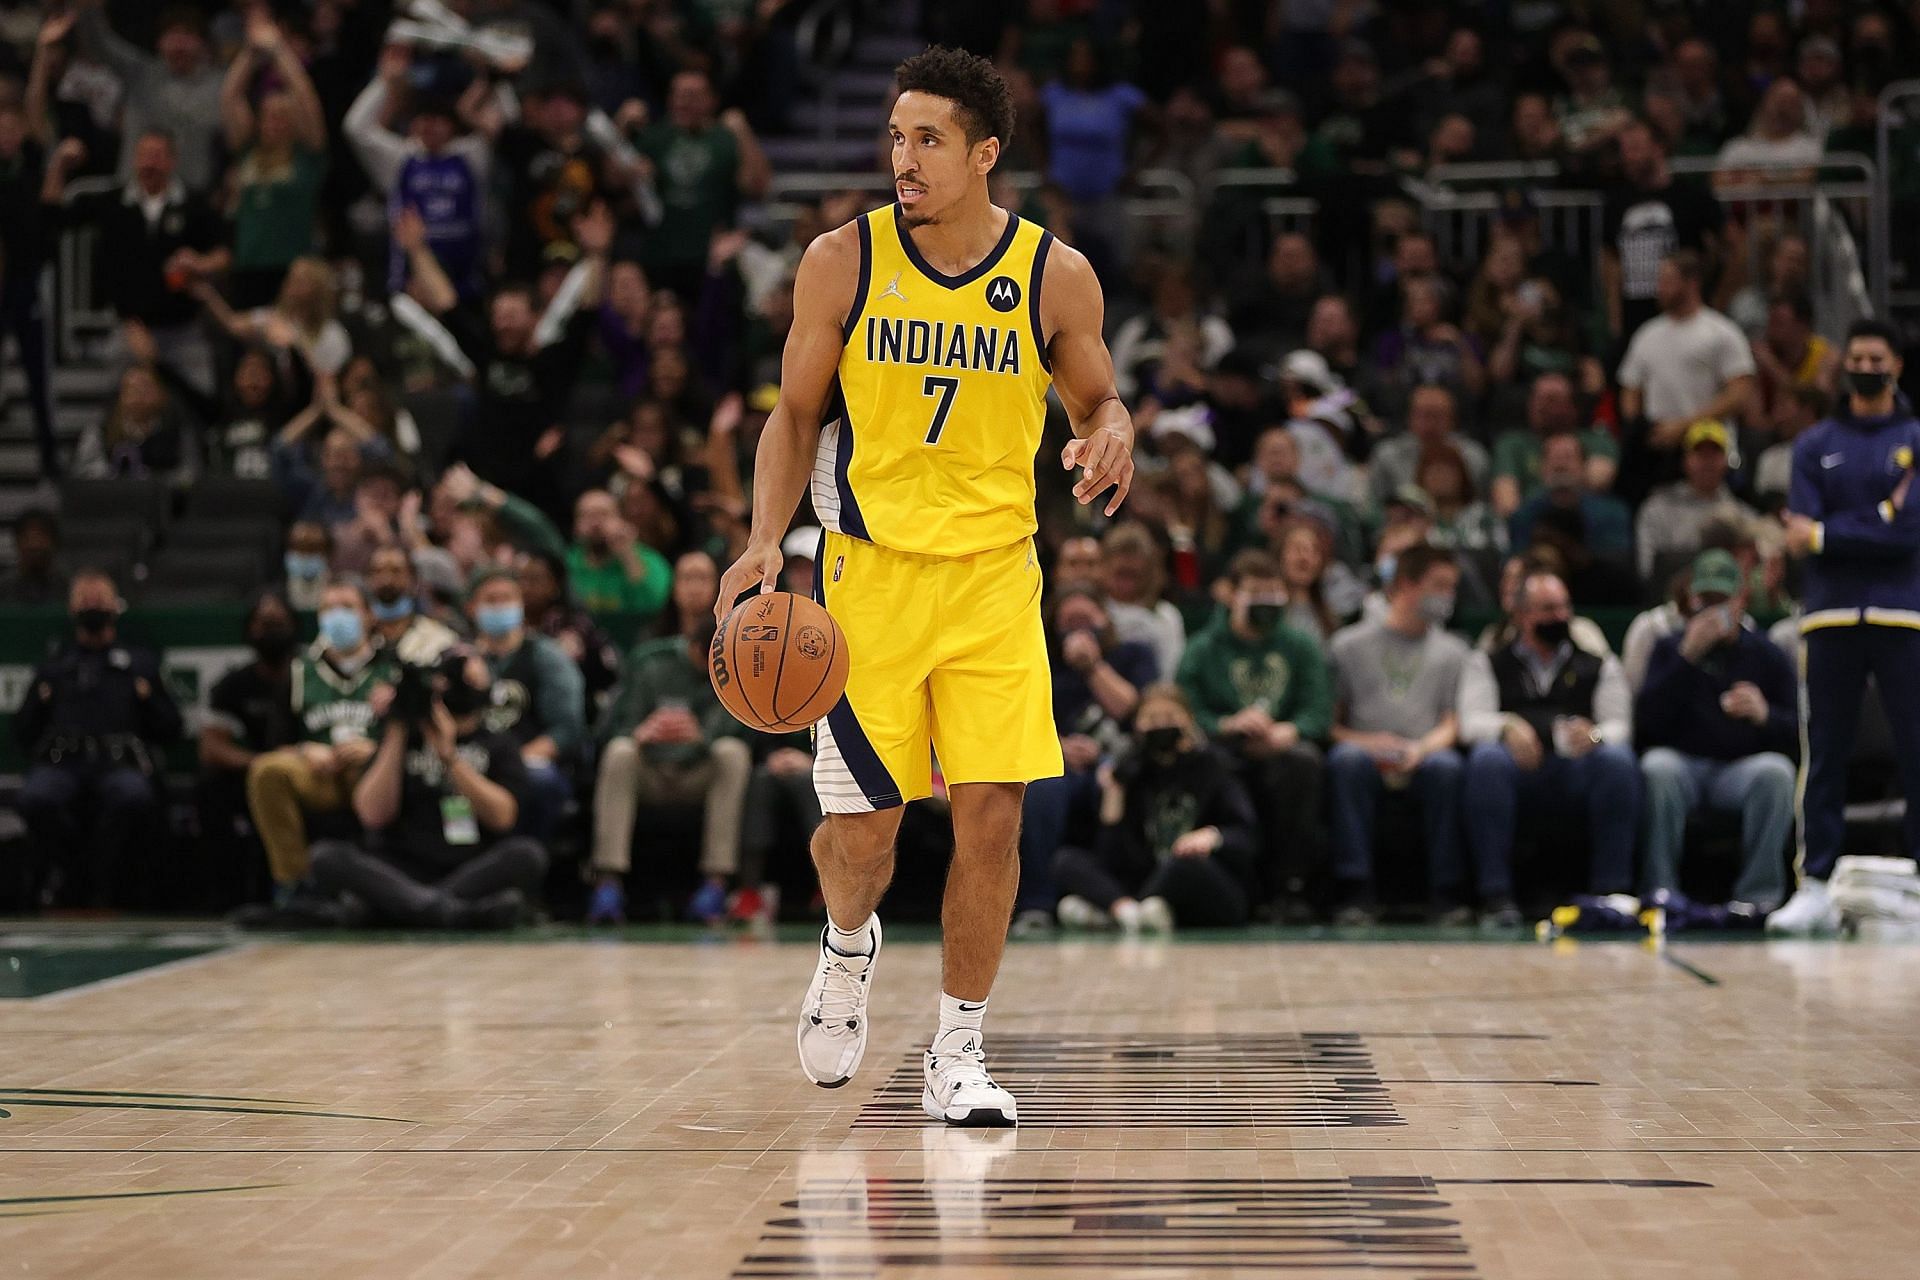 Malcolm Brogdon of the Indiana Pacers.